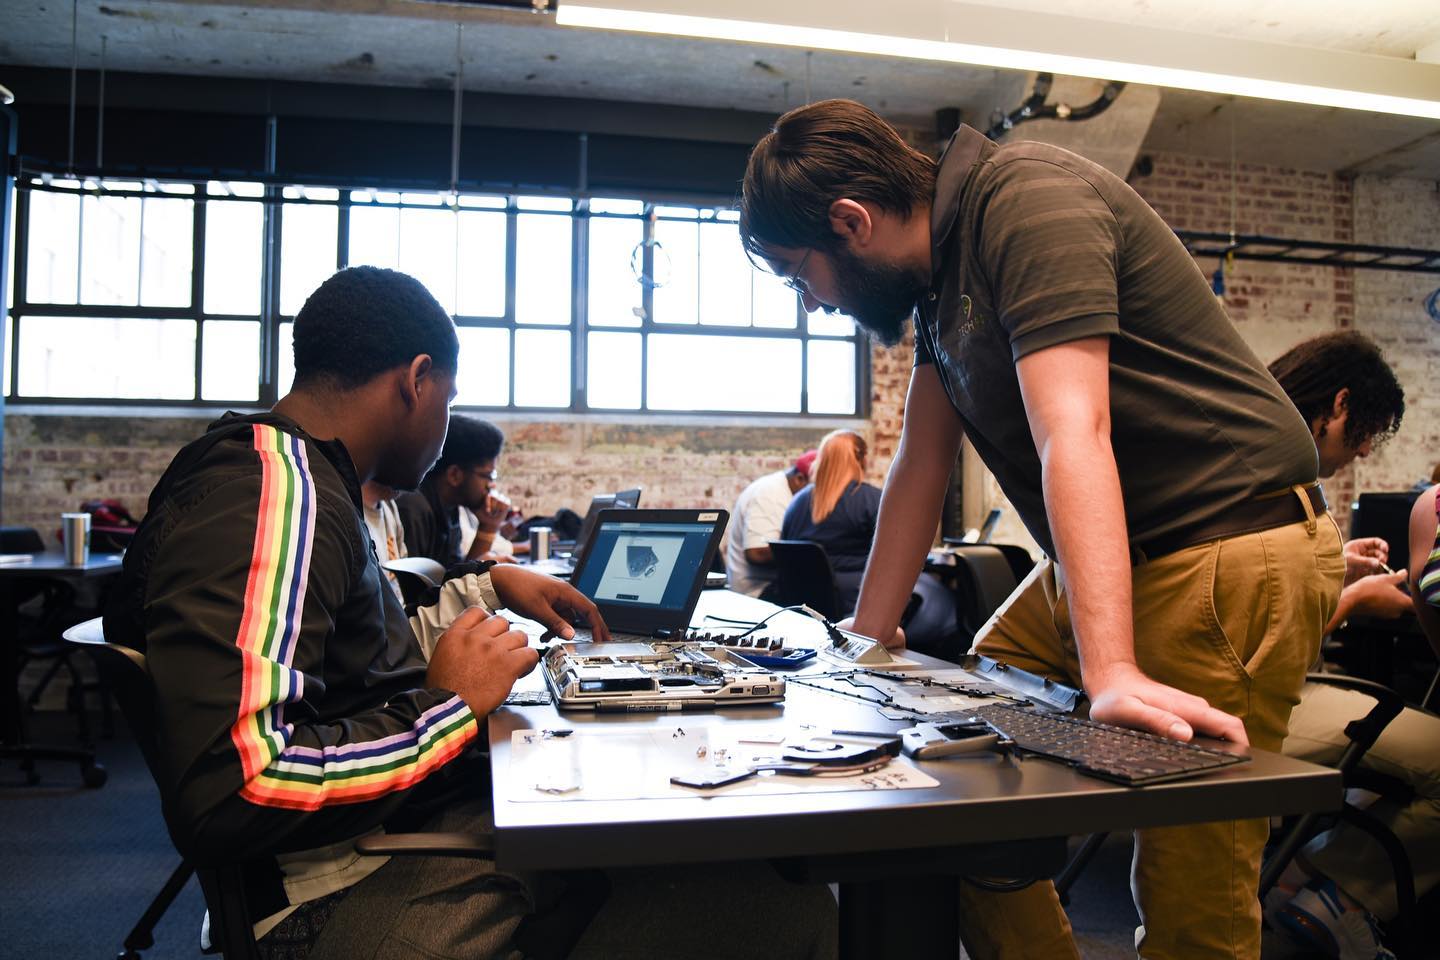 A group of people in the Memphis Tech Industry working on laptops in a classroom.